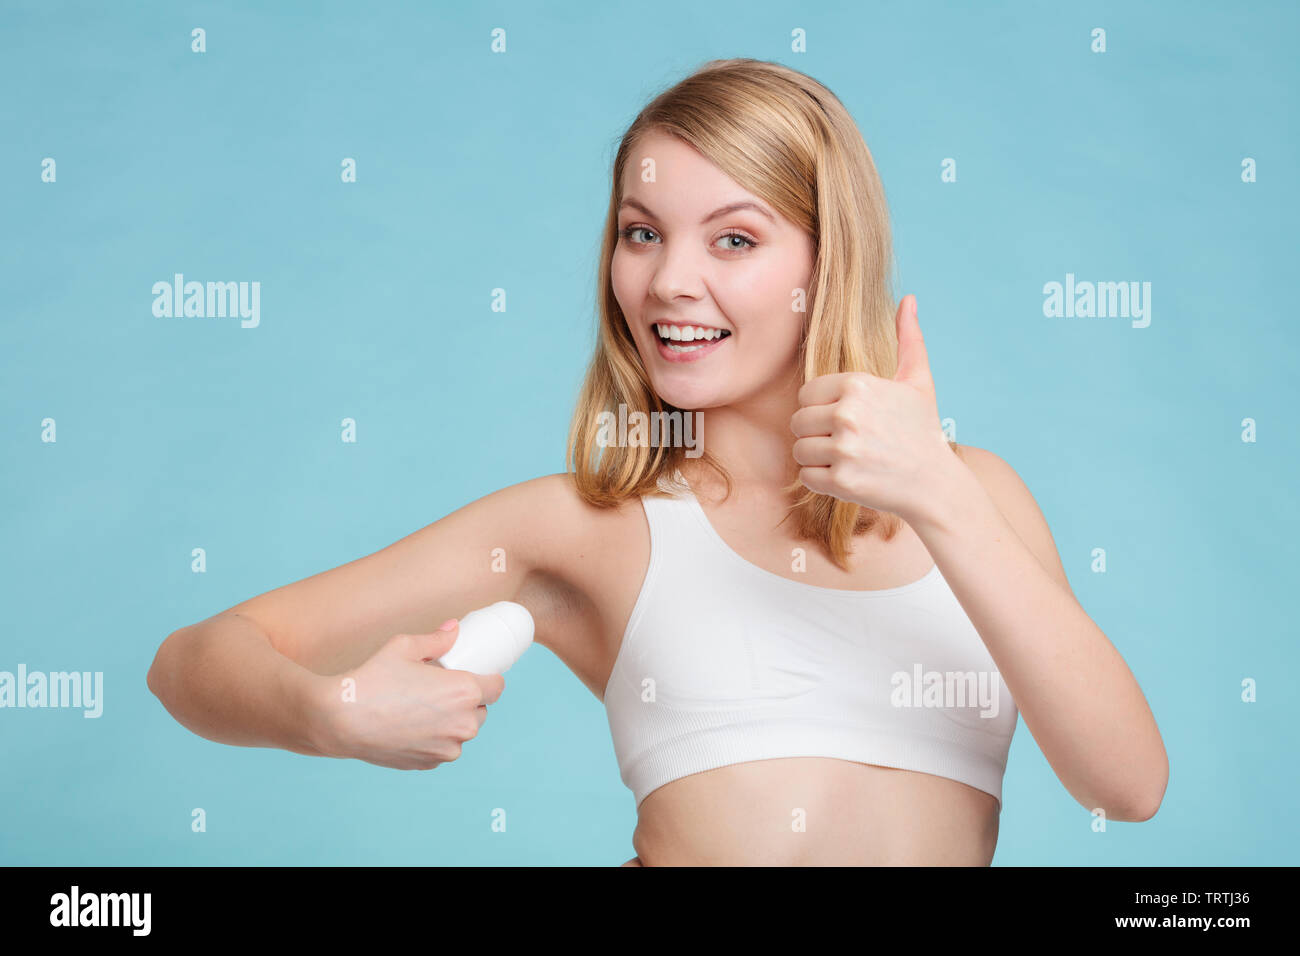 Daily skin care and hygiene. Girl applying stick deodorant in armpit. Young  woman putting antiperspirant in underarms on blue Stock Photo - Alamy